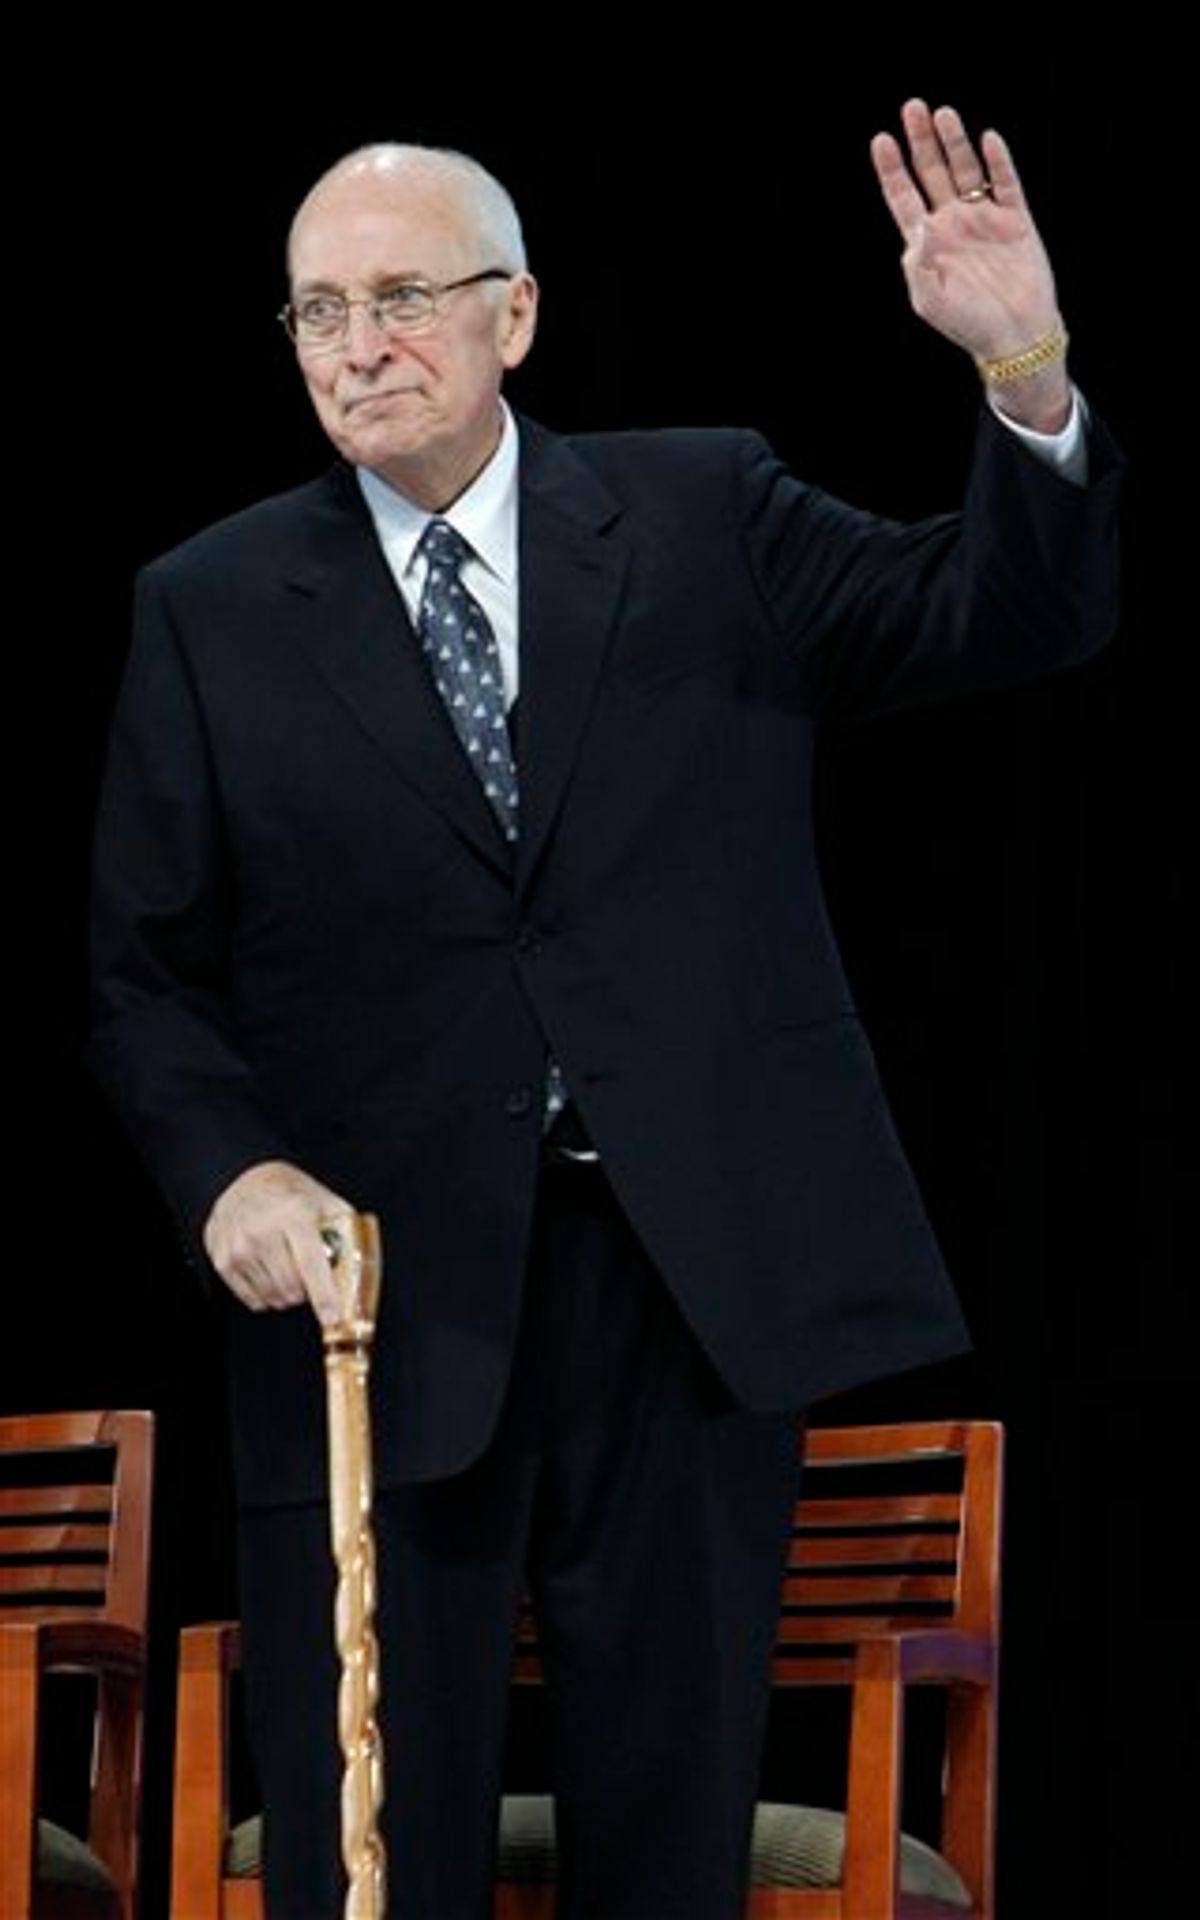 Former Vice President Dick Cheney waves during the groundbreaking ceremony for the President George W. Bush Presidential Center in Dallas, Tuesday, Nov. 16, 2010. (AP Photo/LM Otero)   (AP)